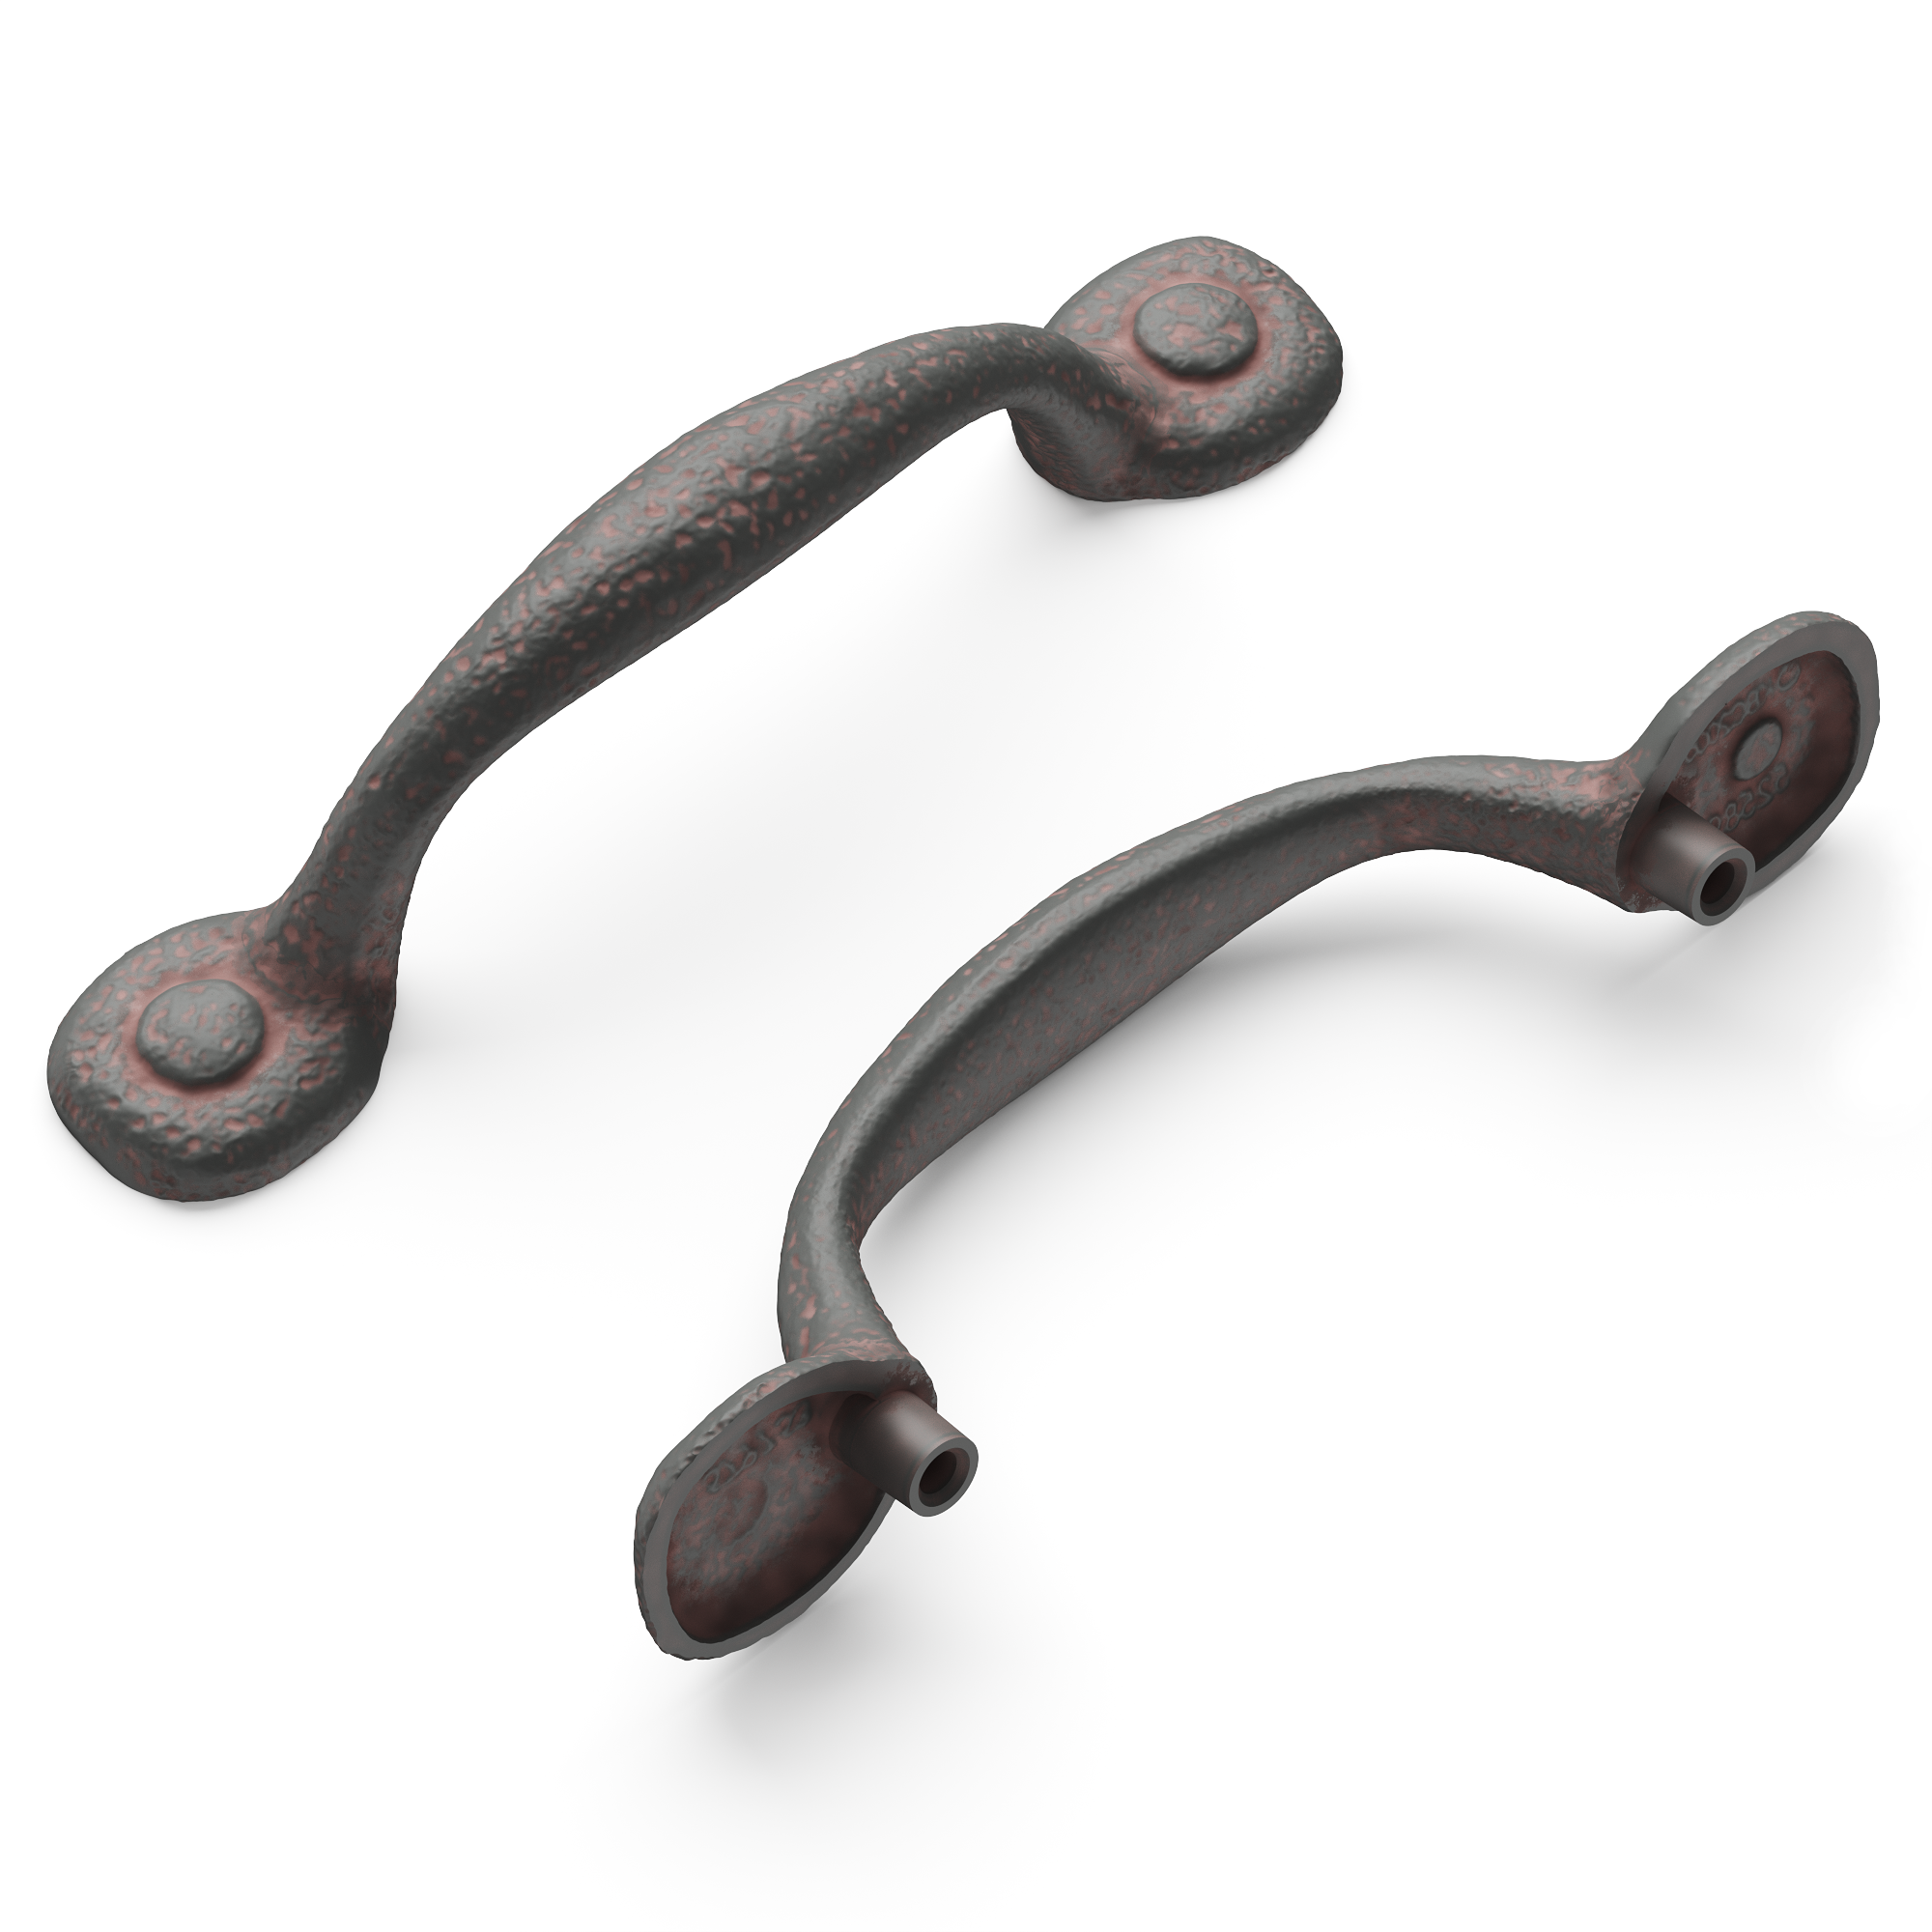 Distressed Bronze “Foundry” Drawer Pulls and Cabinet Knob